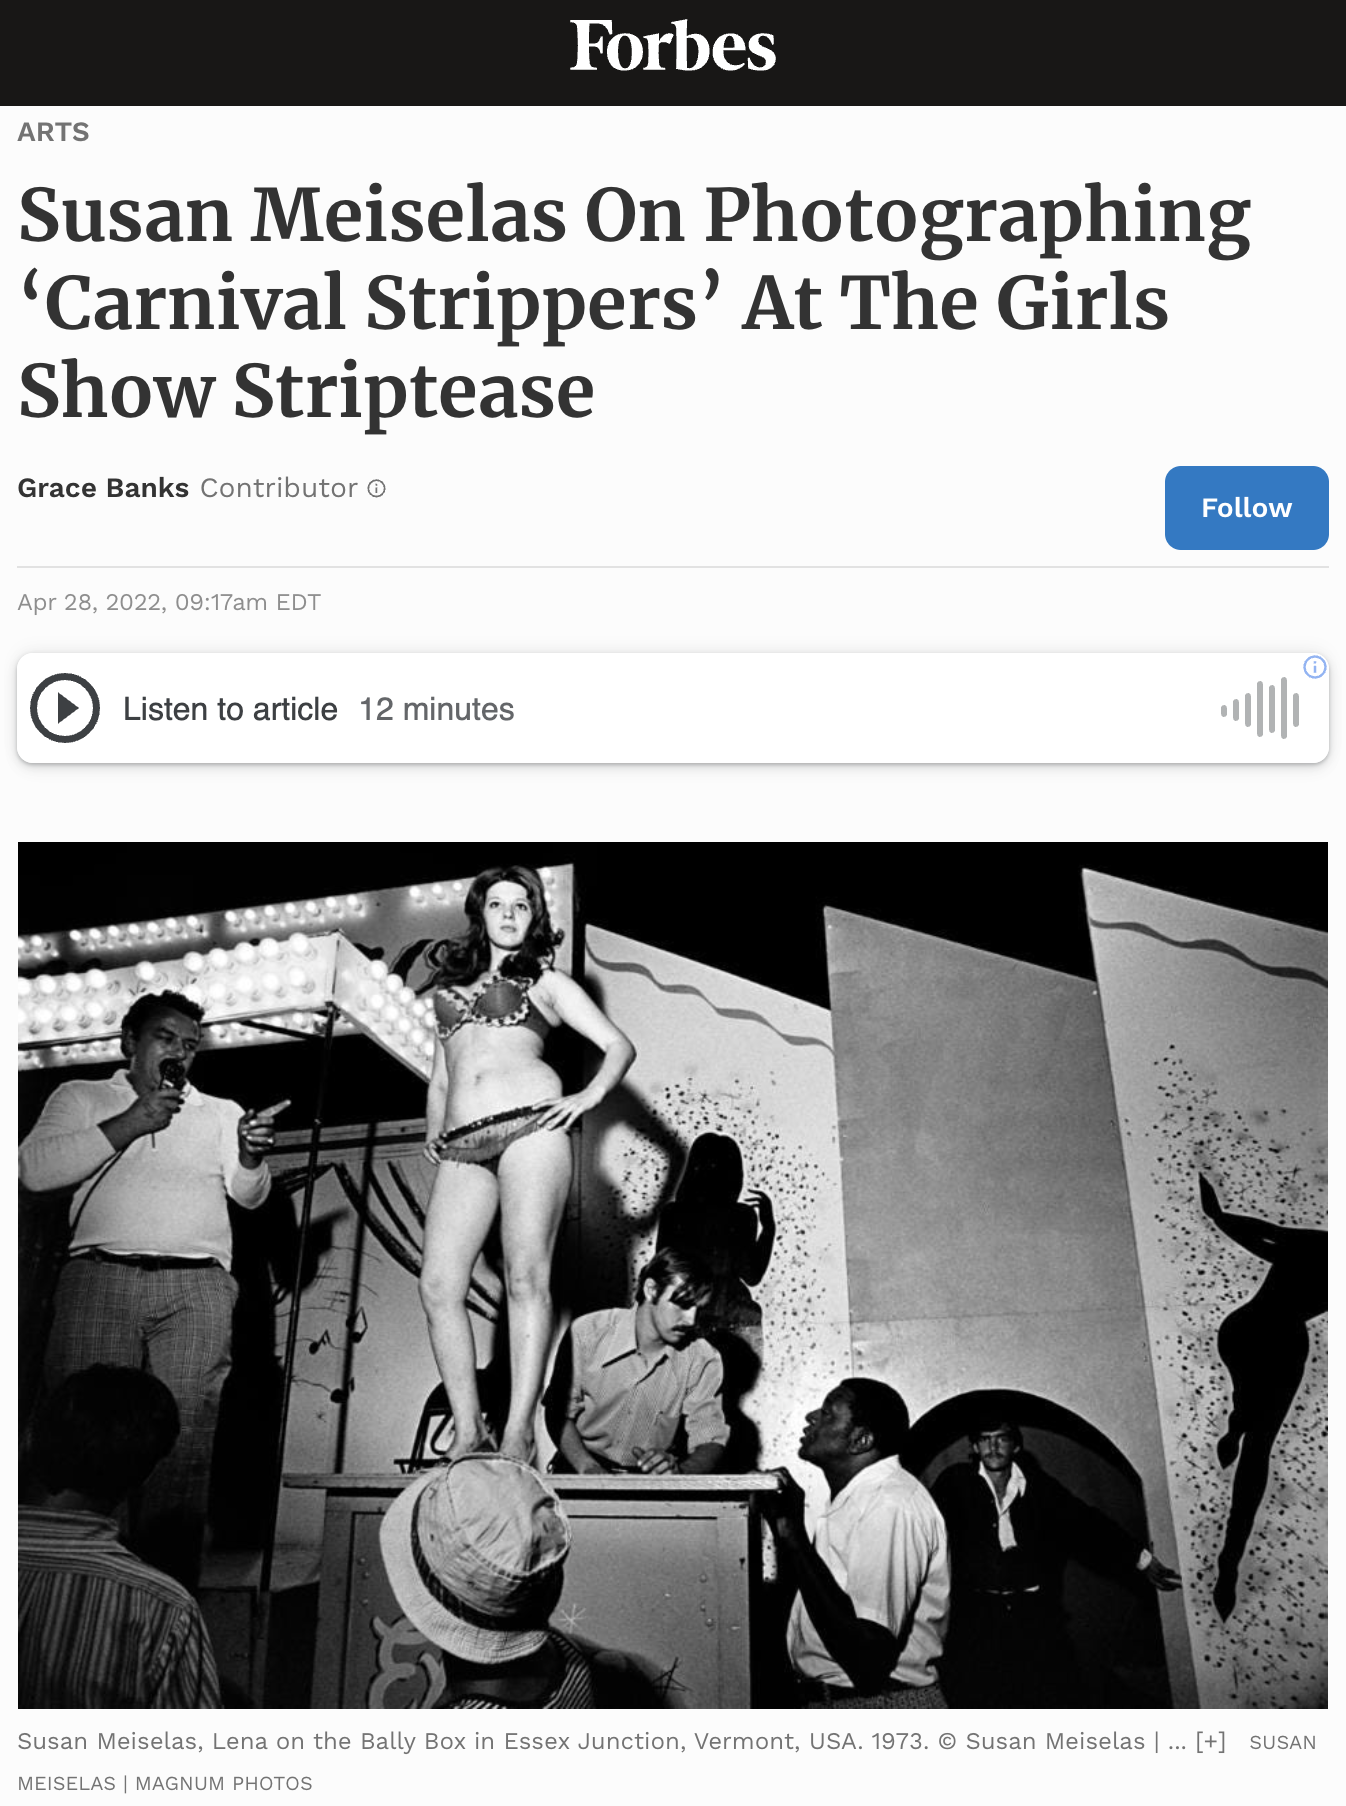 Forbes: Susan Meiselas On Photographing ‘Carnival Strippers’ At The Girls Show Striptease